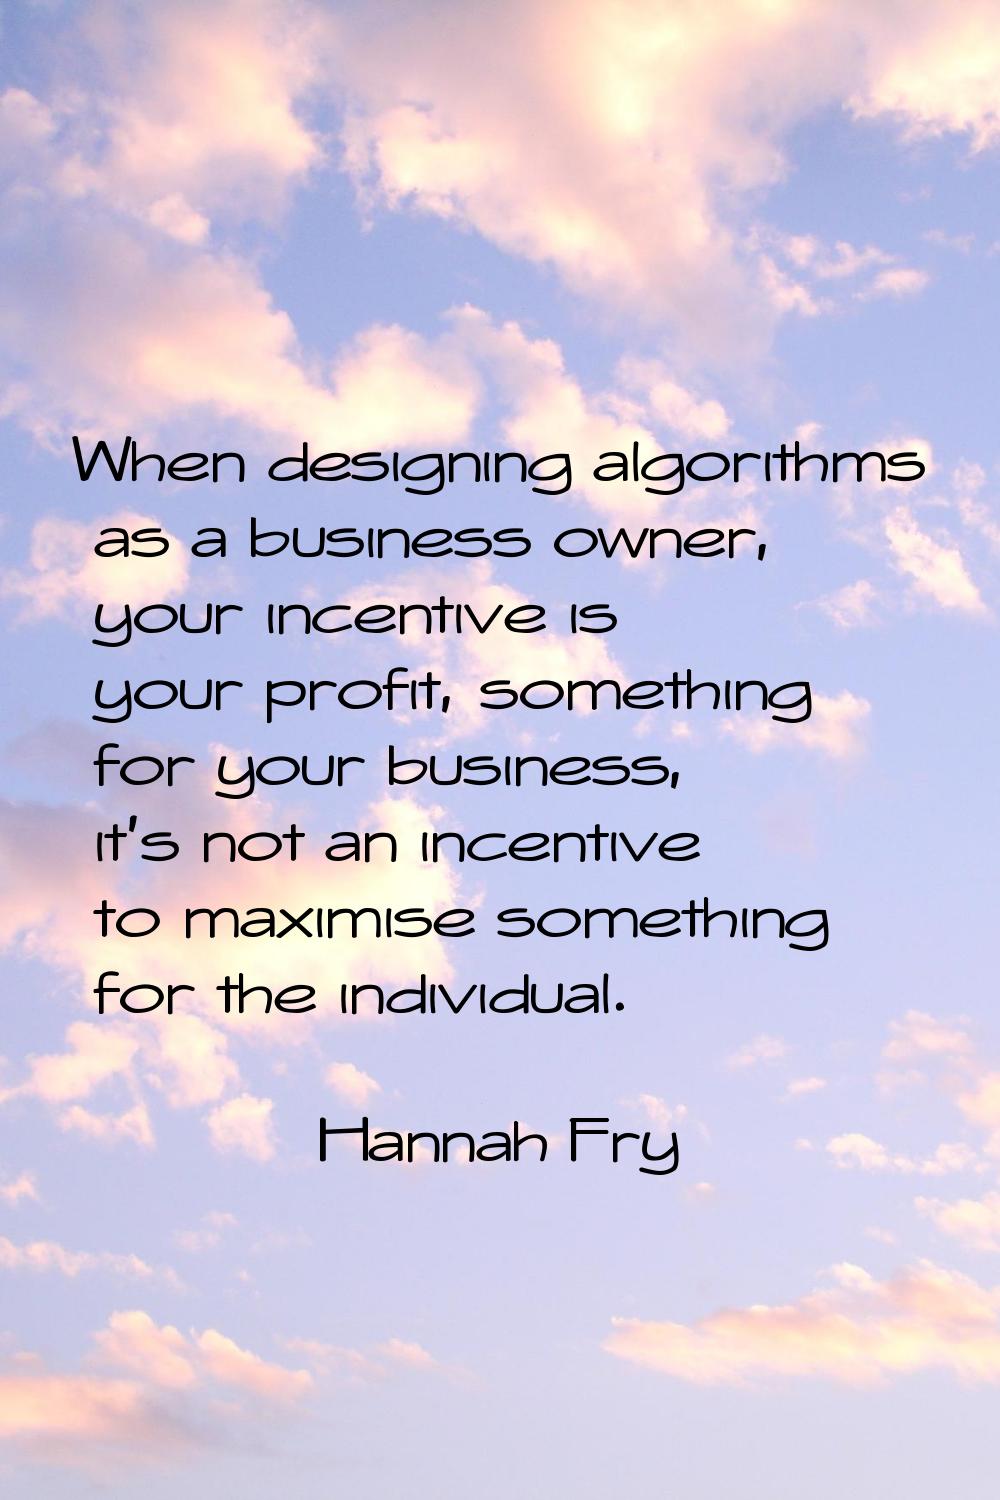 When designing algorithms as a business owner, your incentive is your profit, something for your bu